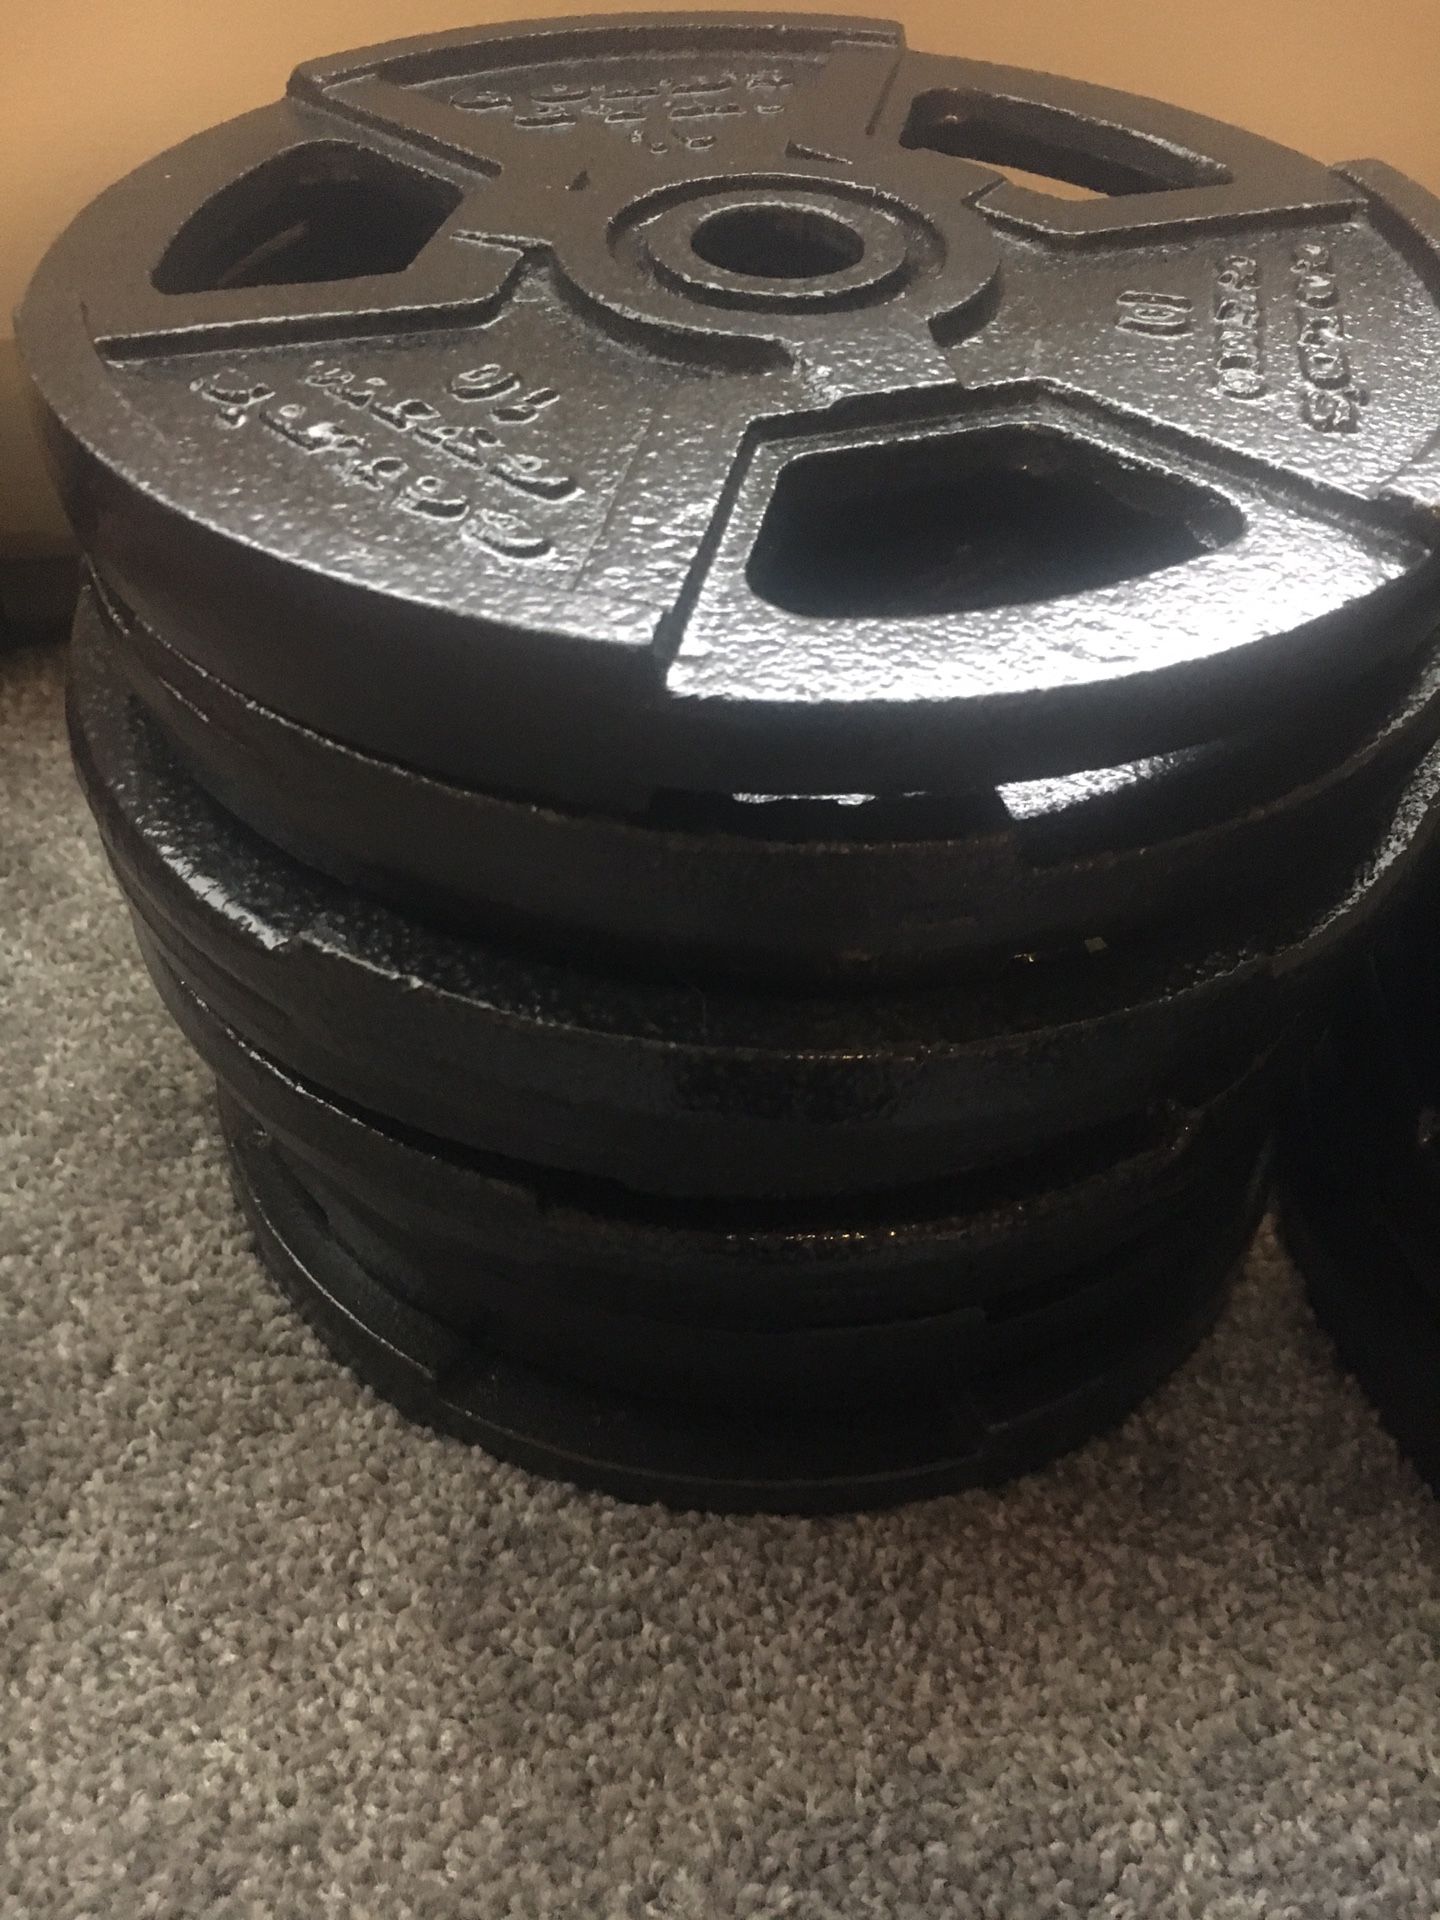 10 lb weight plates